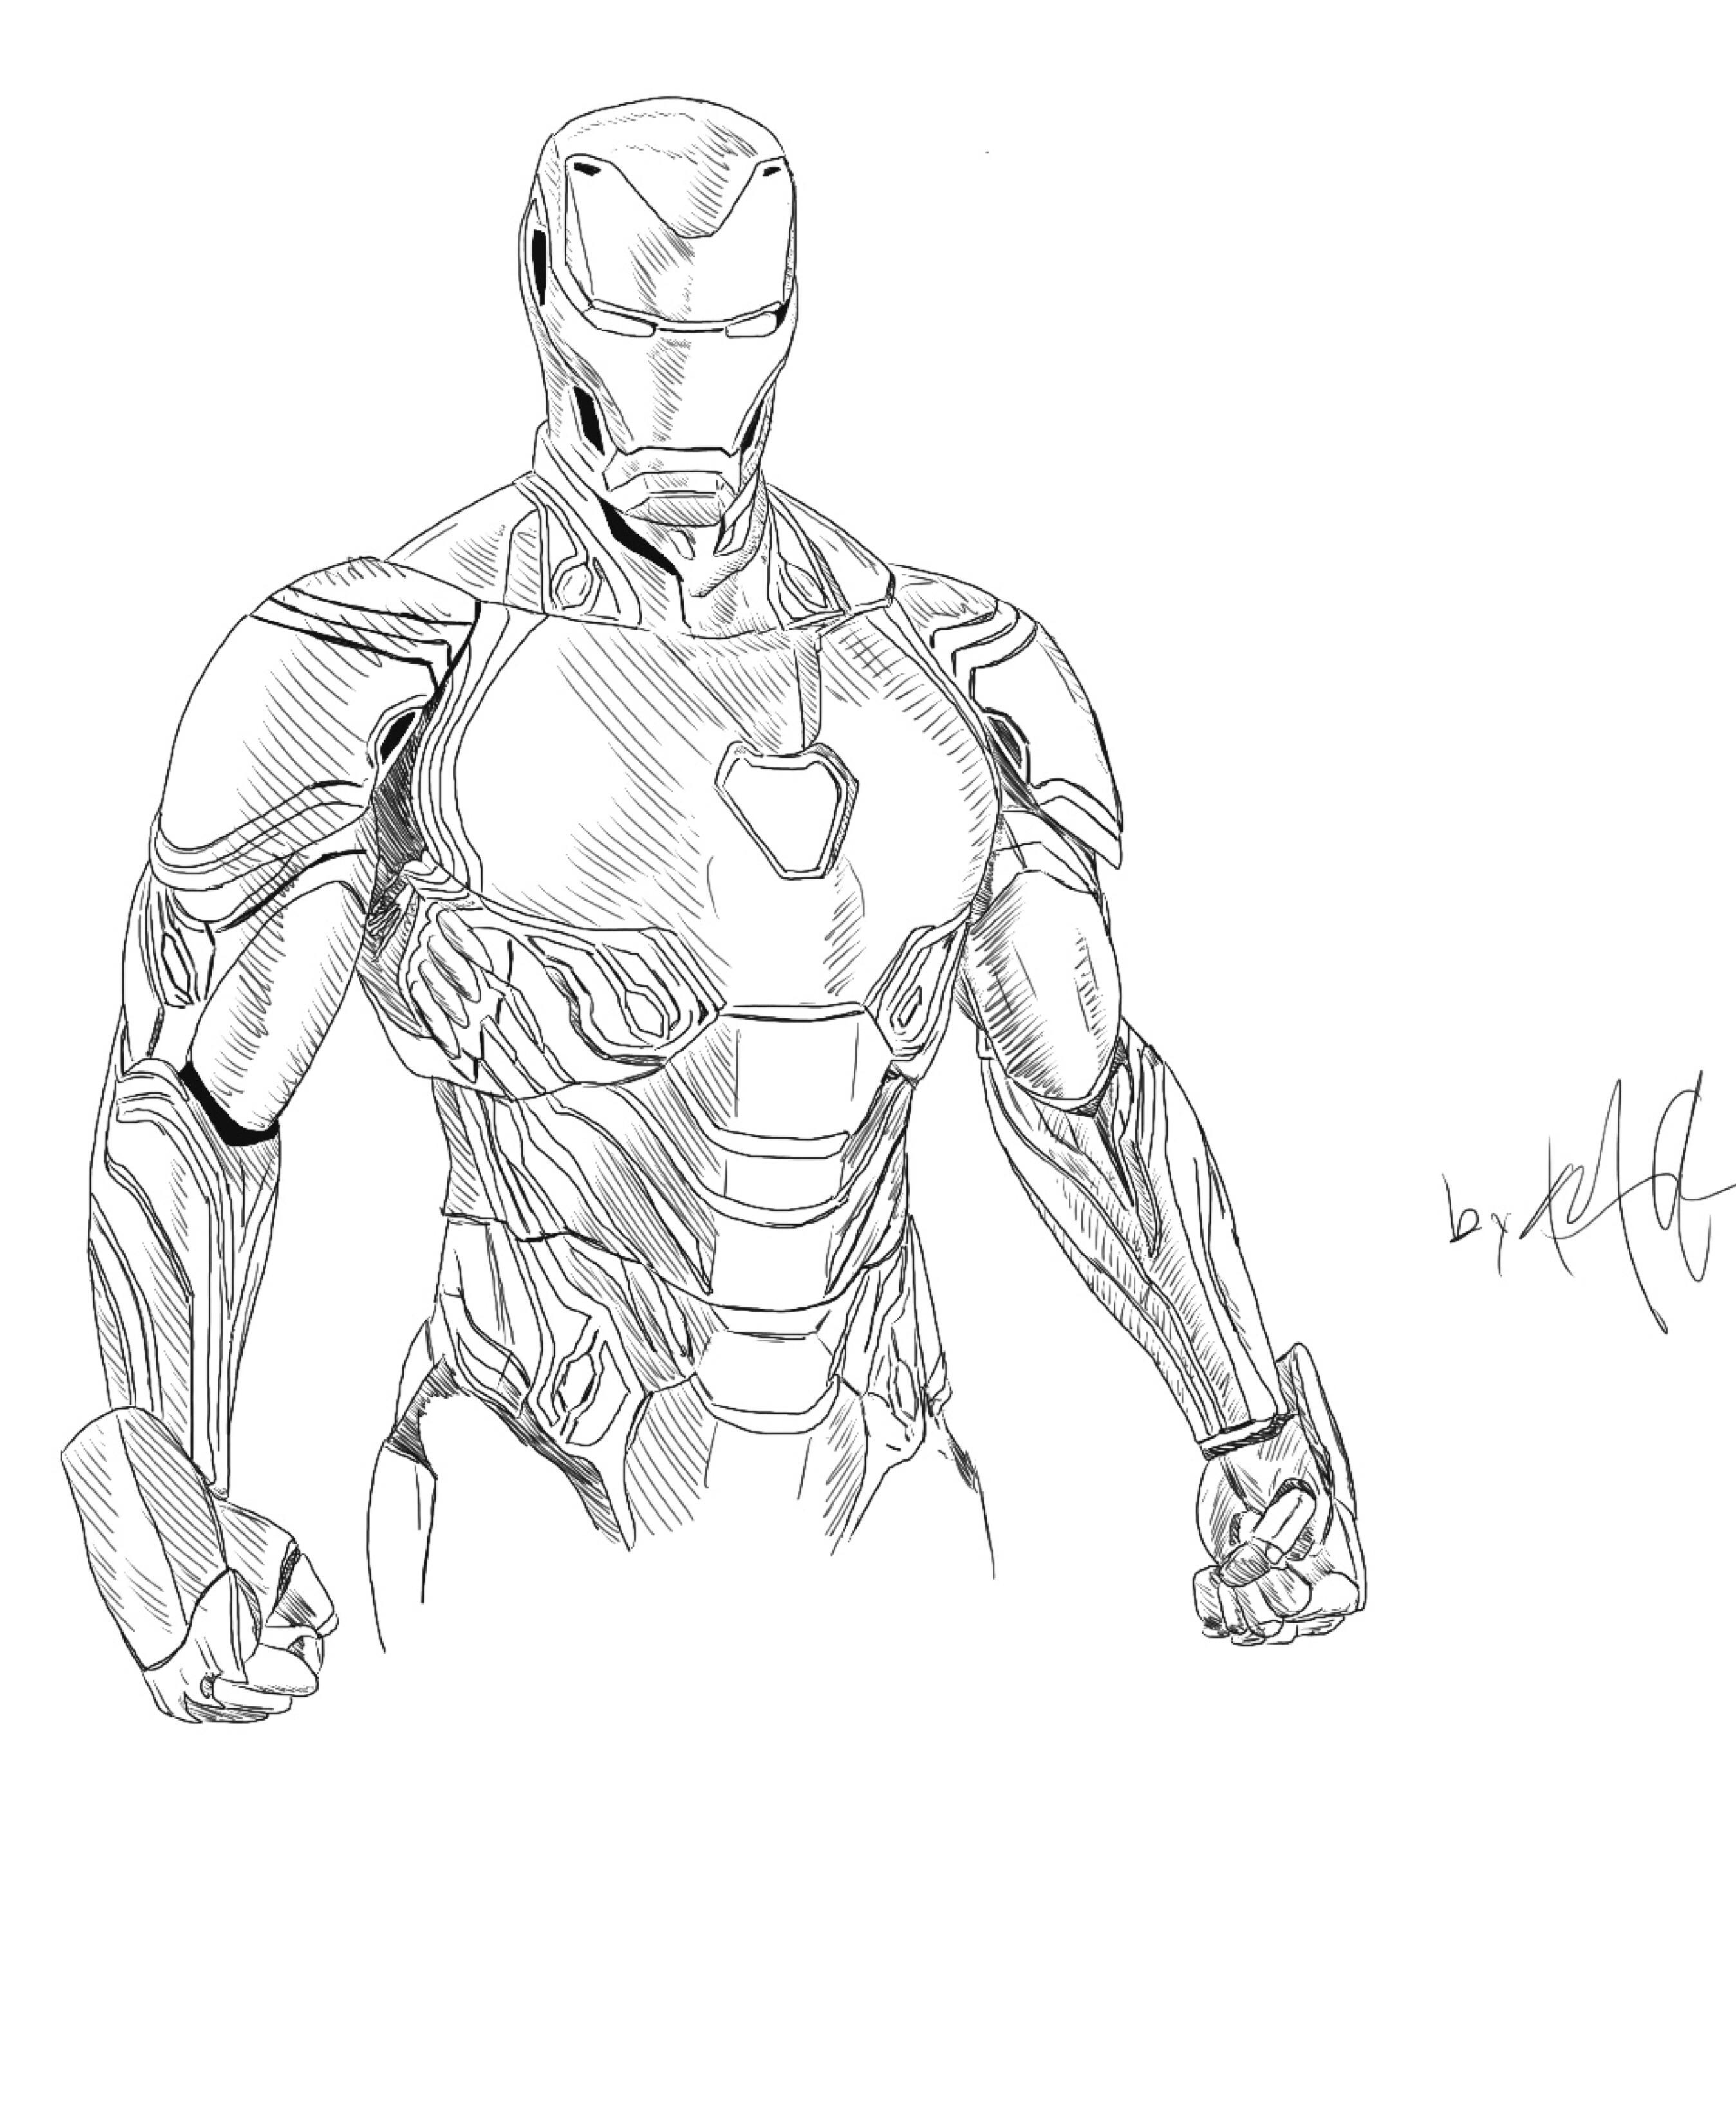 How To Draw Iron Man In Simple And East Steps For Beginner-saigonsouth.com.vn